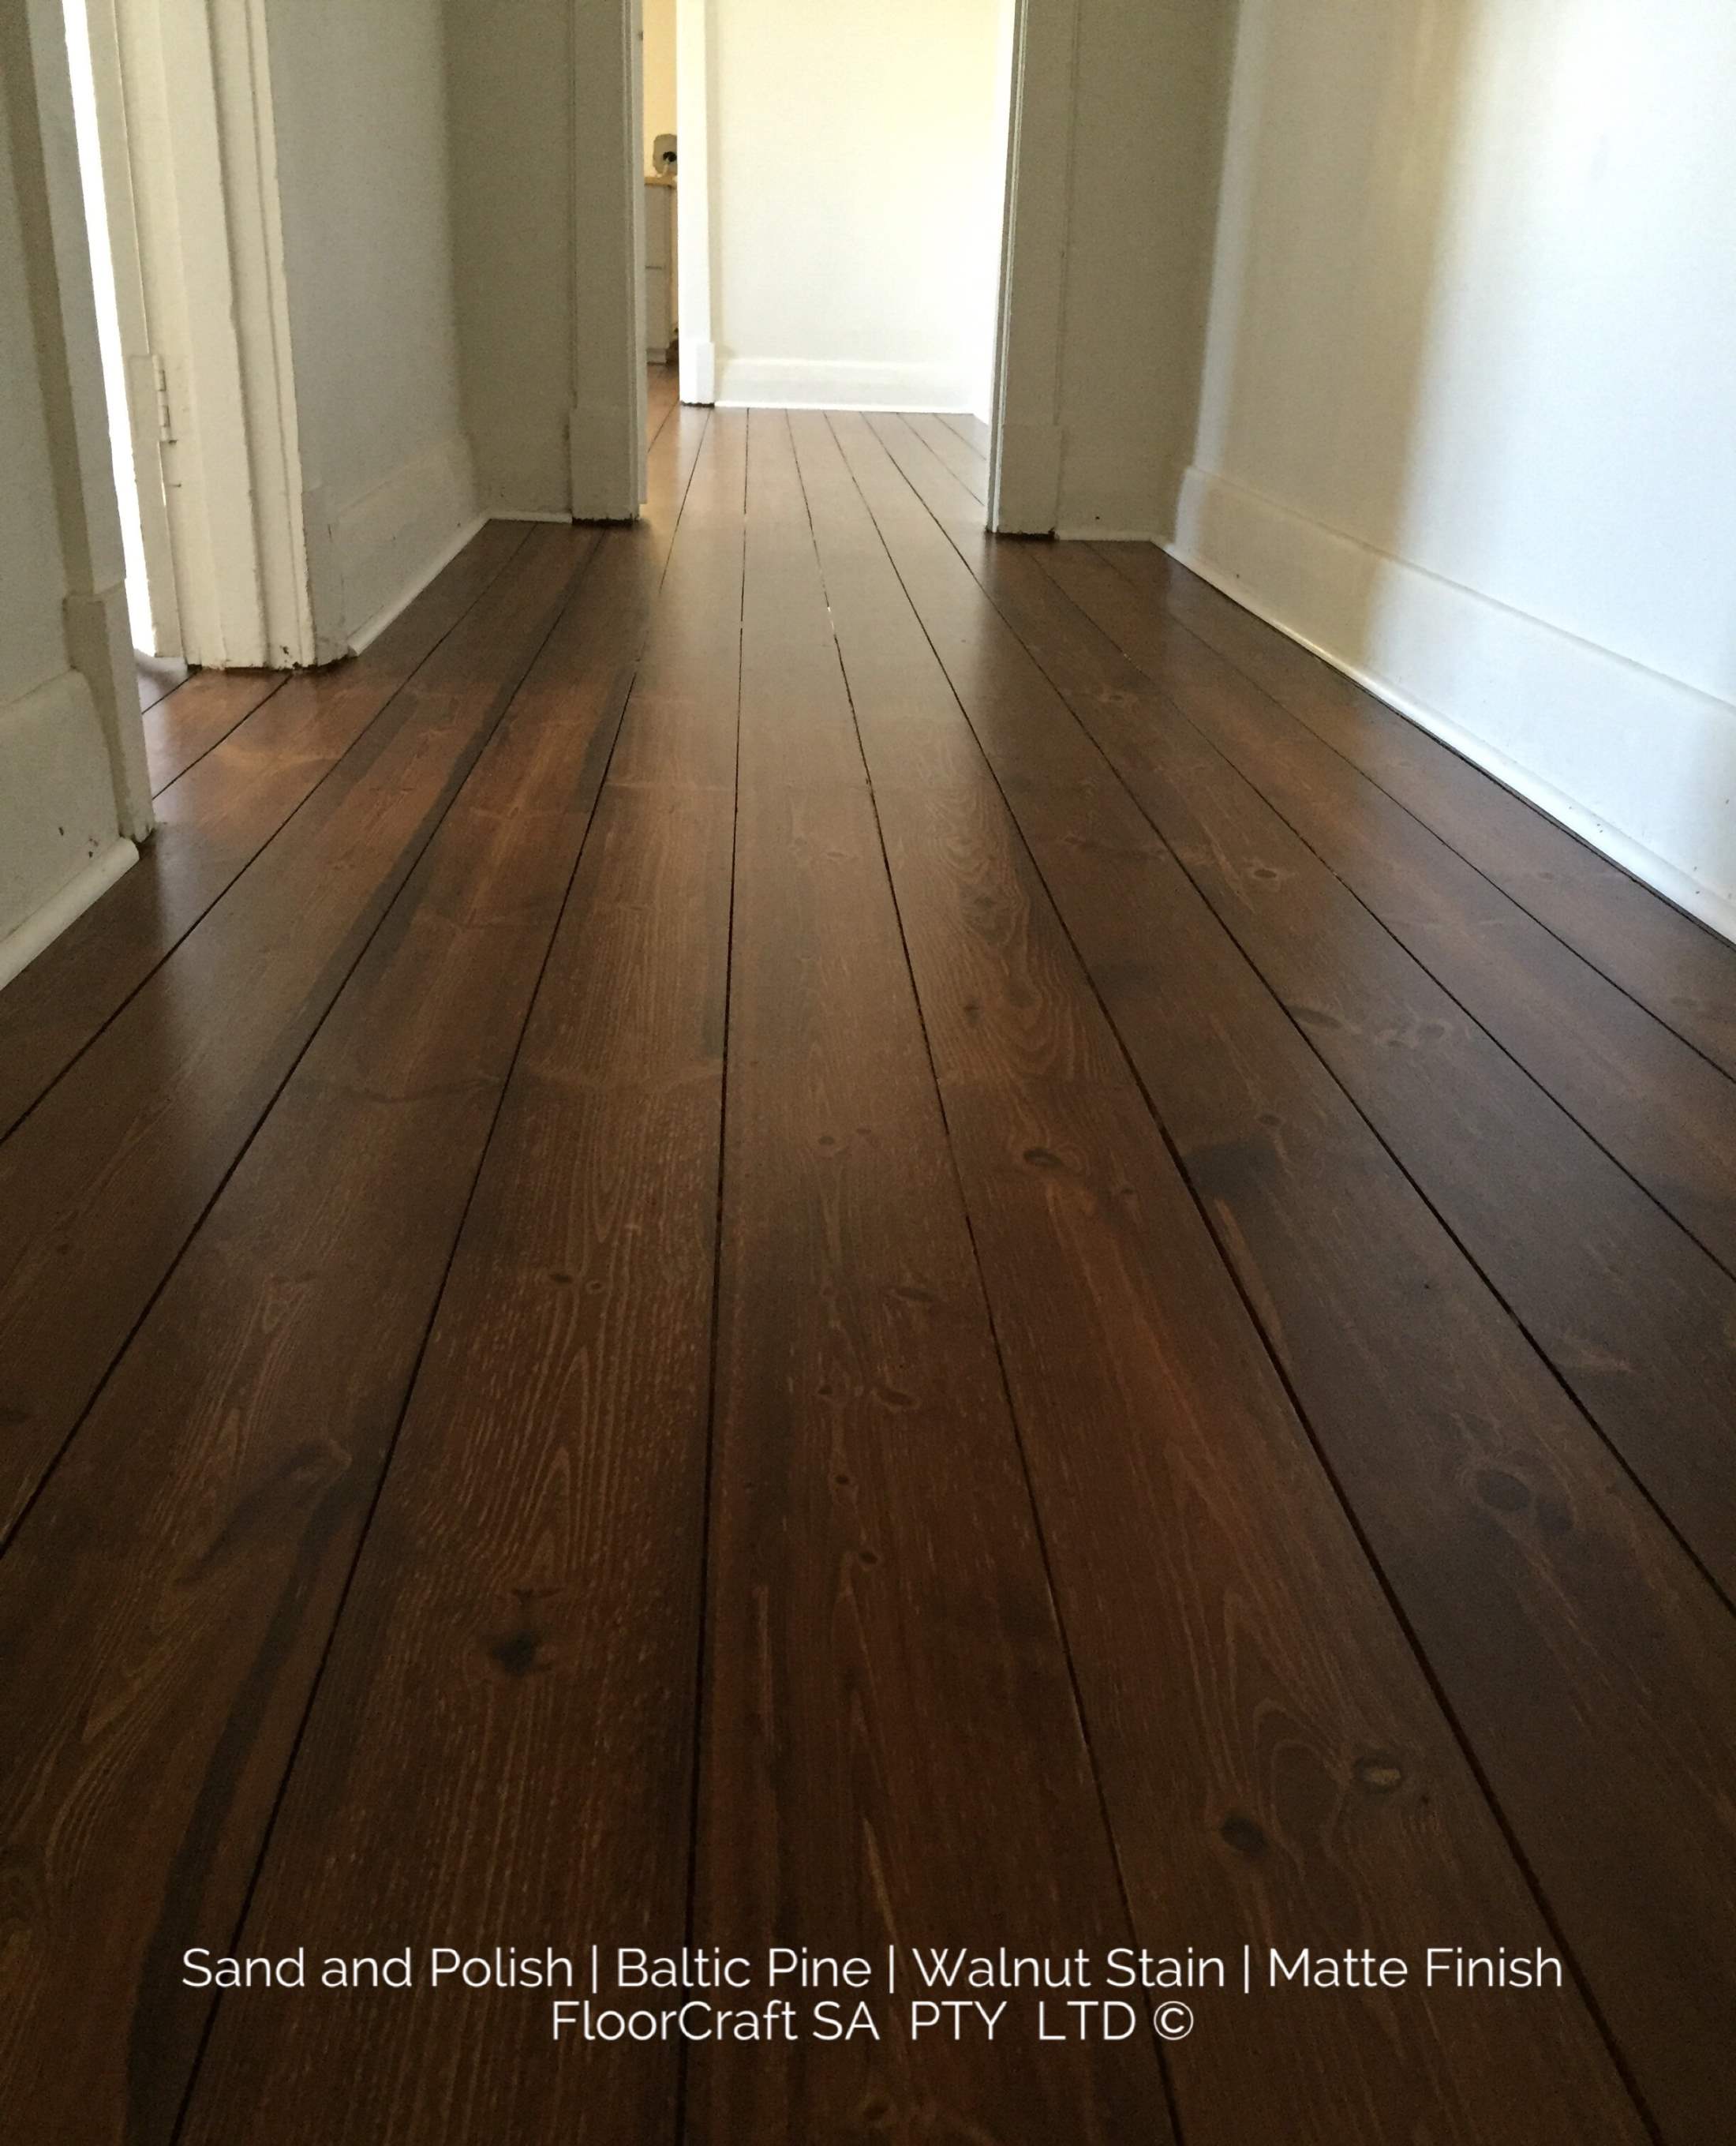 Timber Flooring Services in Adelaide